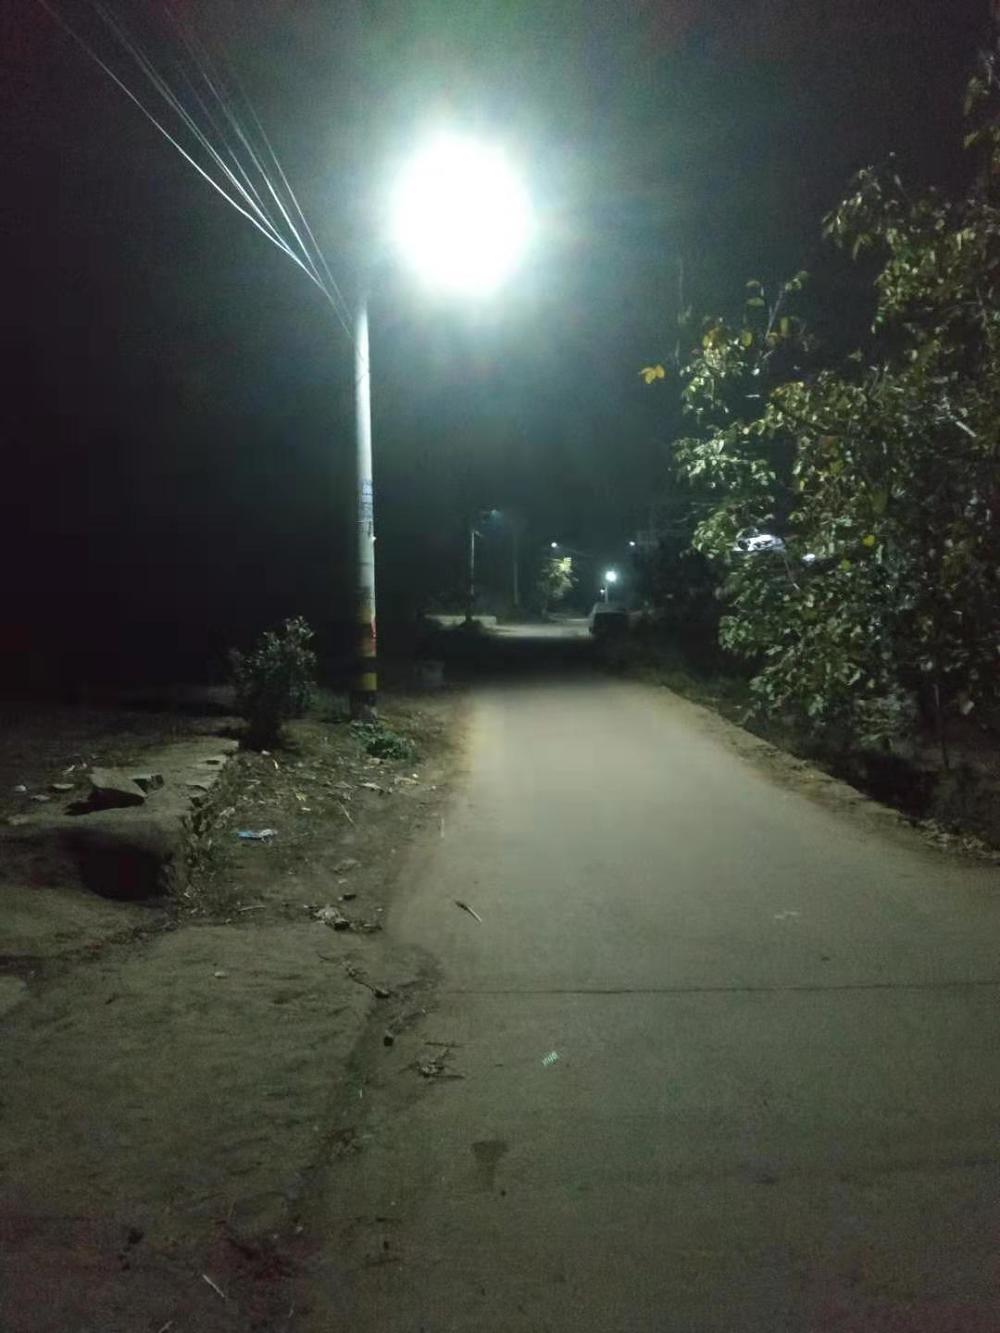 New rural solar street lamp project case